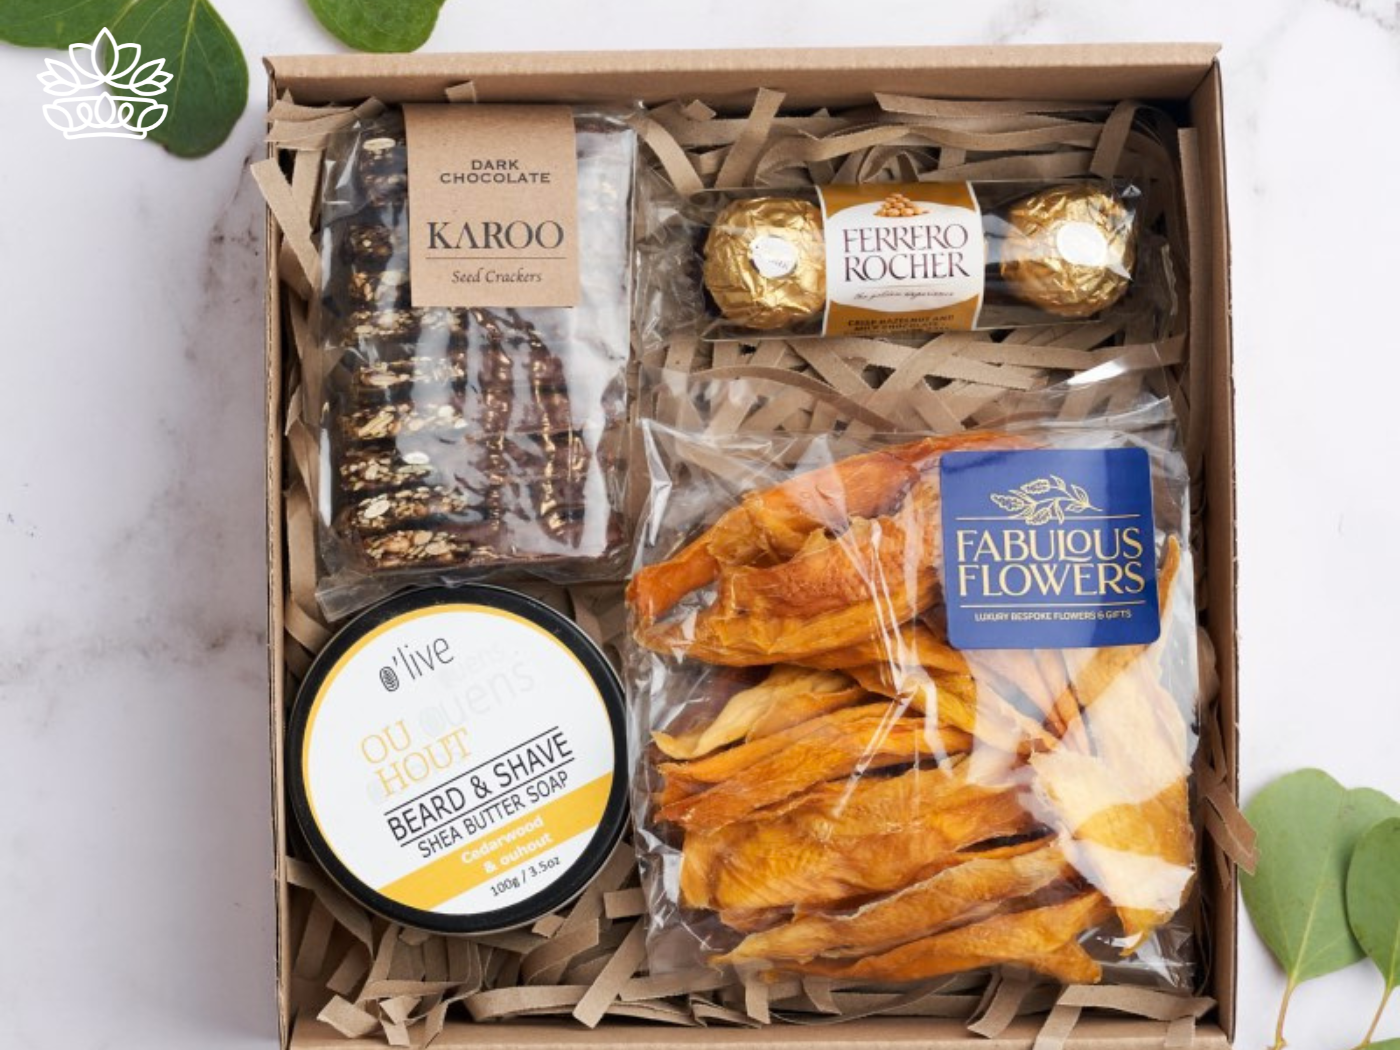 A curated gift box containing dark chocolate seed crackers, Ferrero Rocher chocolates, dried fruit, and shea butter soap, placed beside a selection of gourmet items like sparkling grape juice, granola, and pantry essentials. Fabulous Flowers and Gifts. Gift Boxes for Boyfriend. Delivered with Heart.